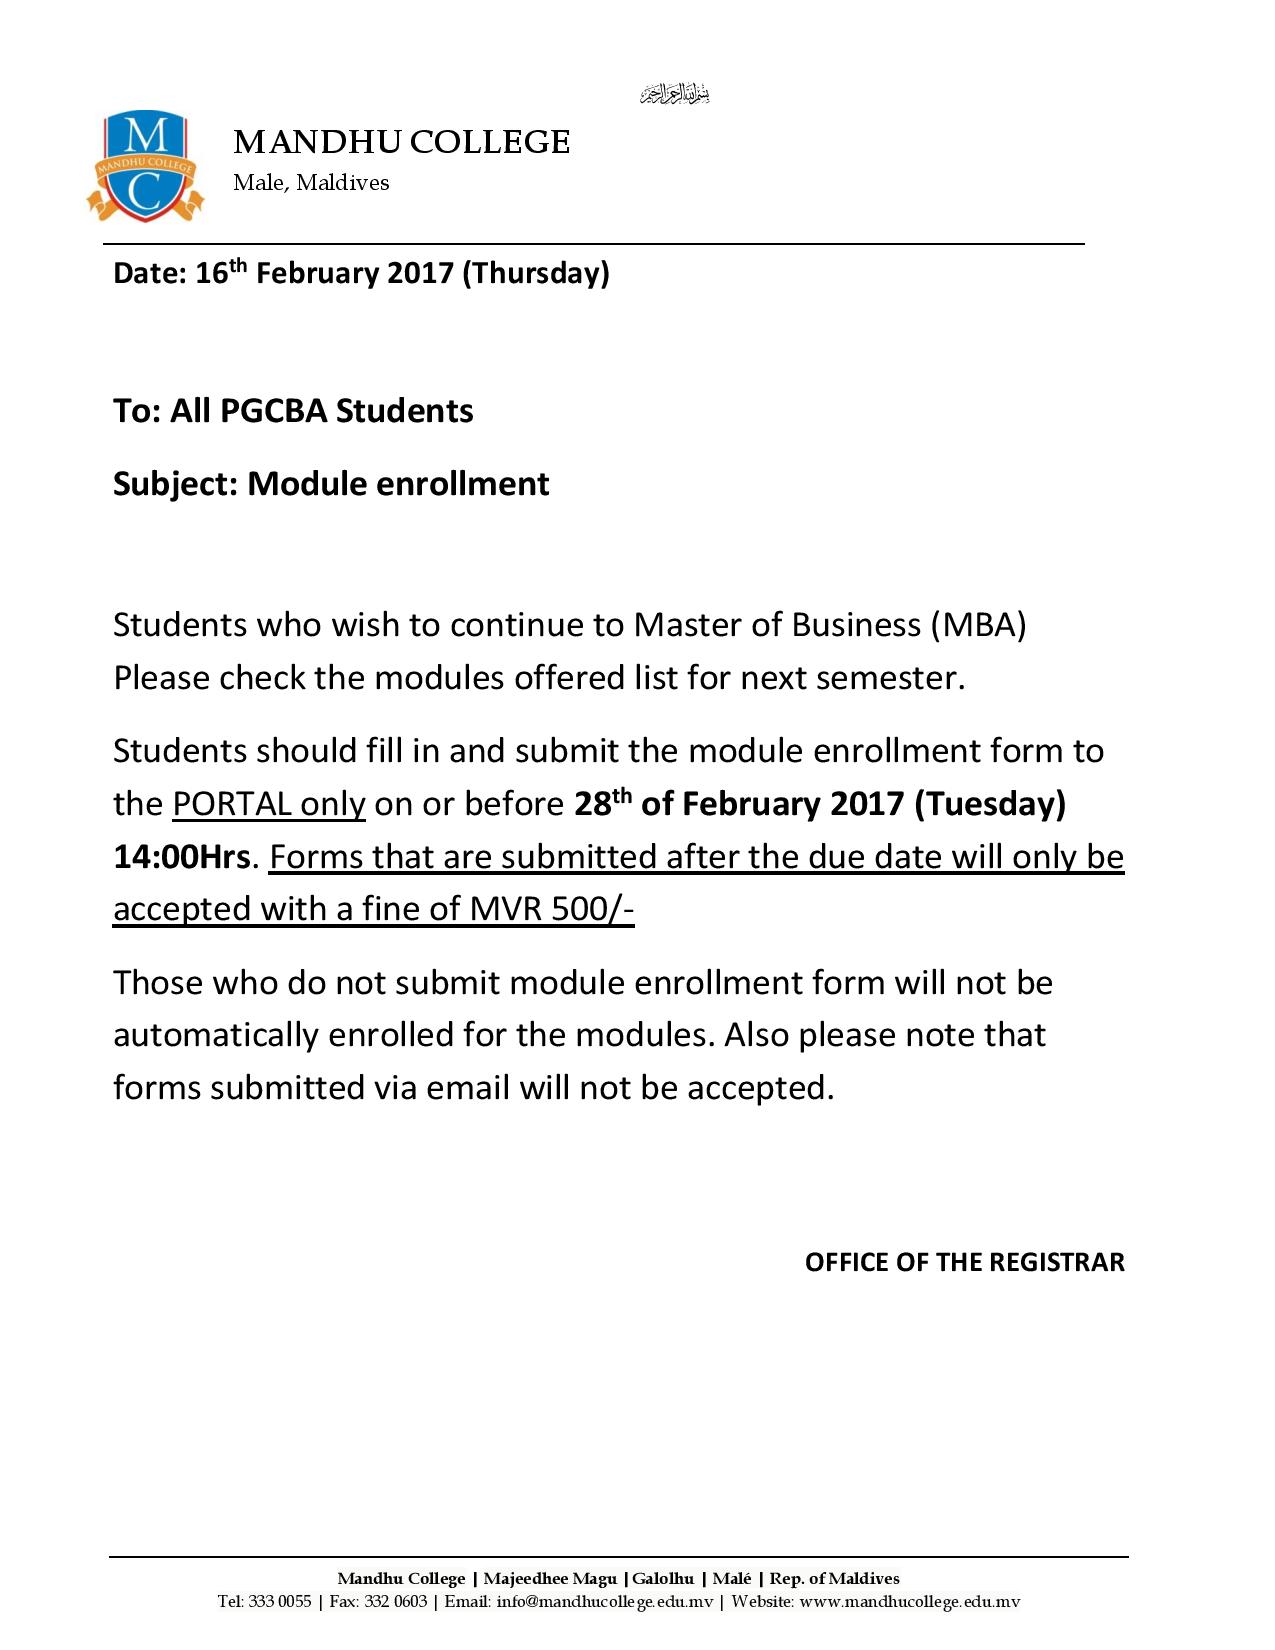 Attachment Notice regarding module enrollment for MBA Cont students-page-001.jpg